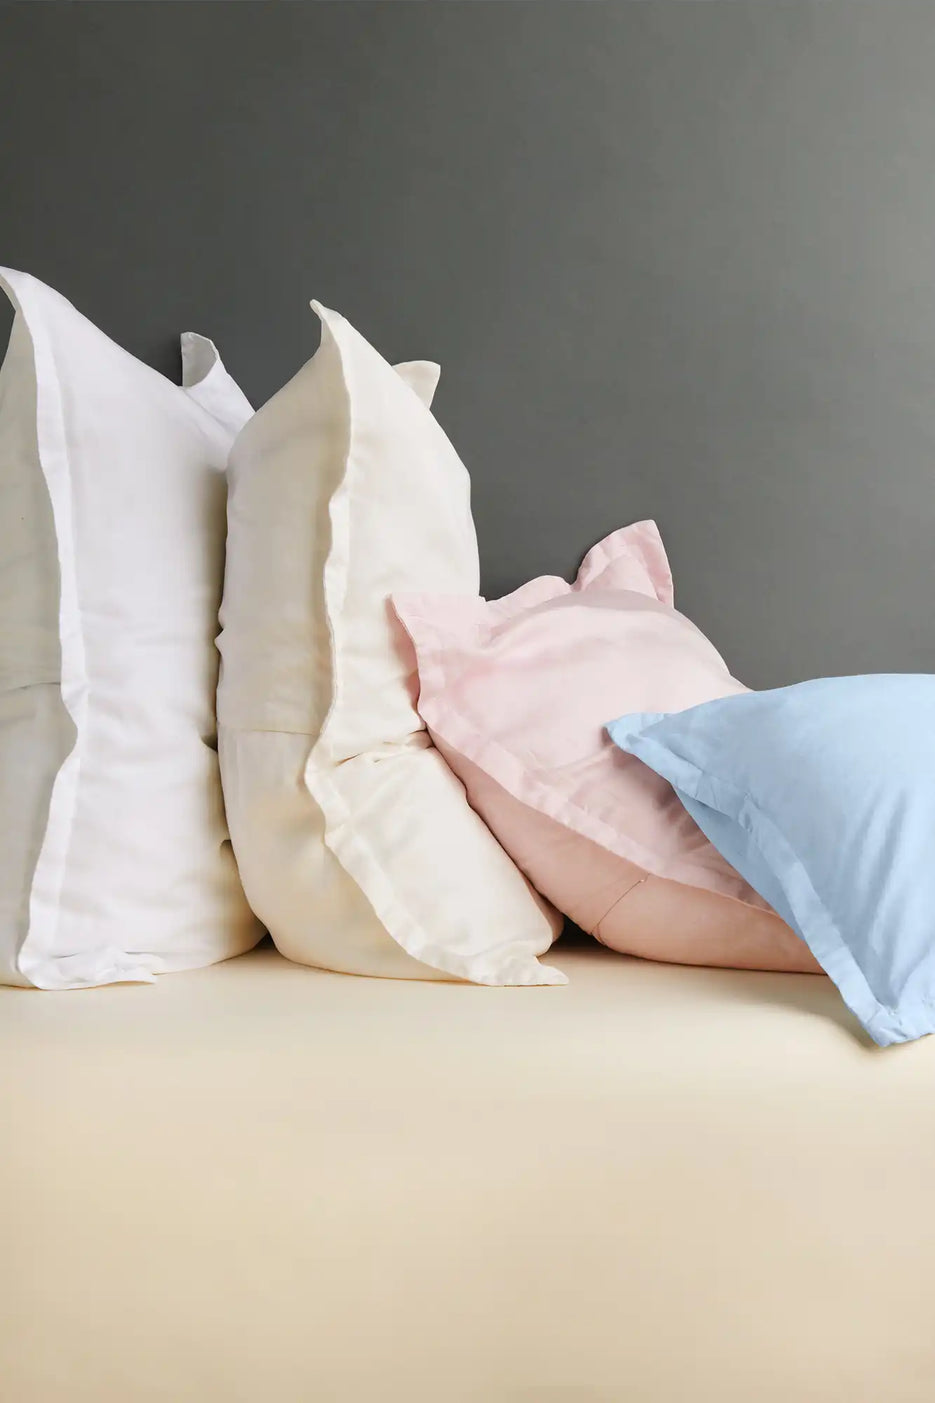 Try Verywell's Top-Tested Pillows and Mattresses for a Better Night's Sleep